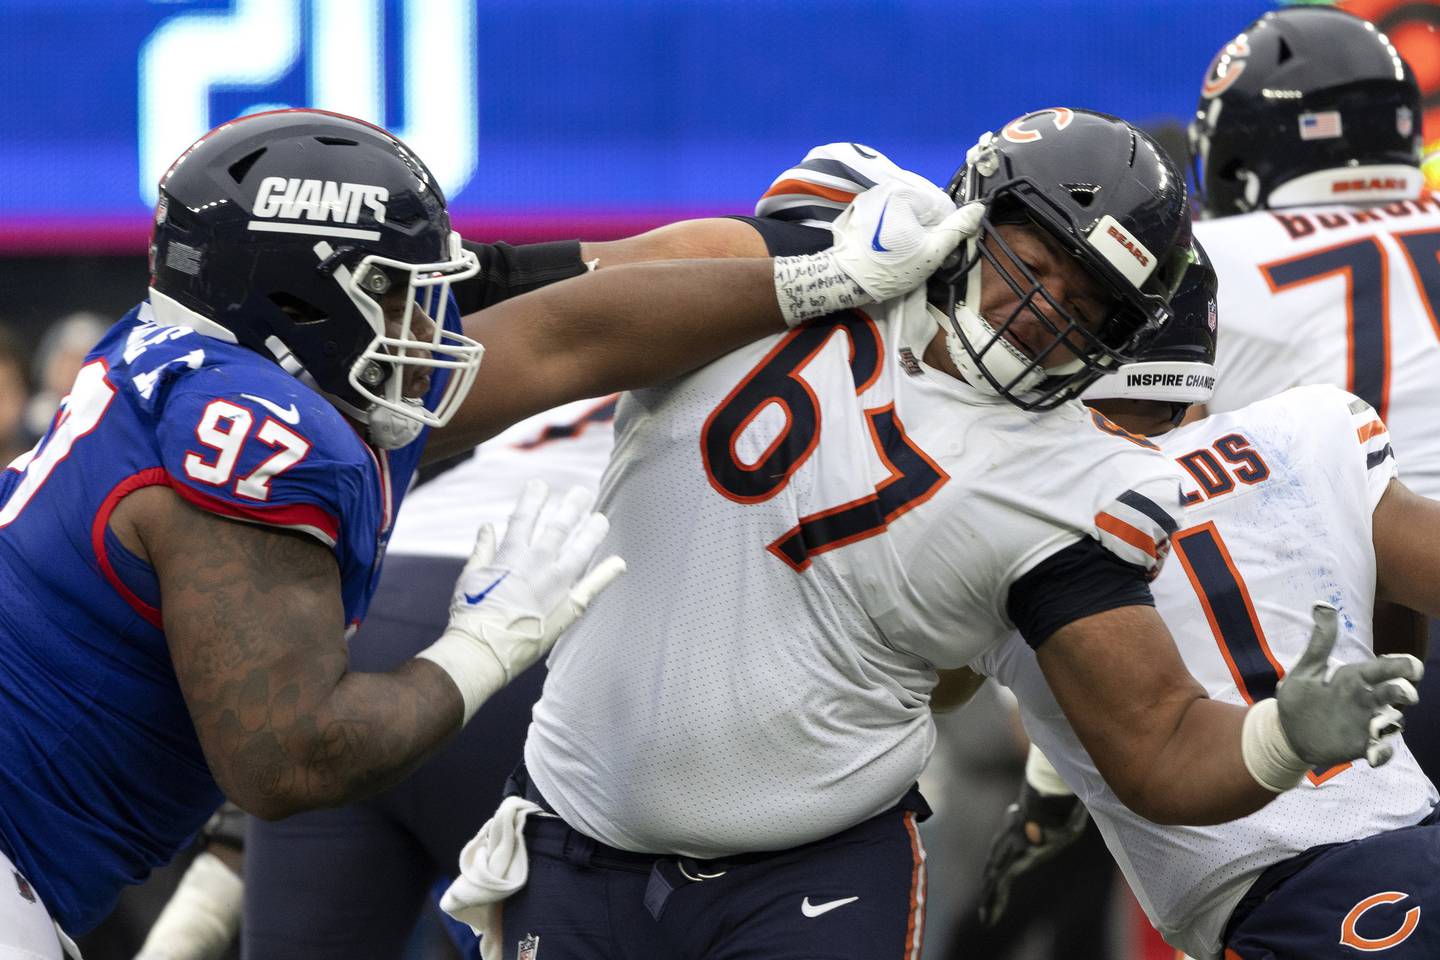 Giants defensive tackle Dexter Lawrence (97) grabs the jersey of Bears center Sam Mustipher during the fourth quarter on Oct. 12, 2022, at MetLife Stadium in East Rutherford, N.J. The Bears lost 20-12. 